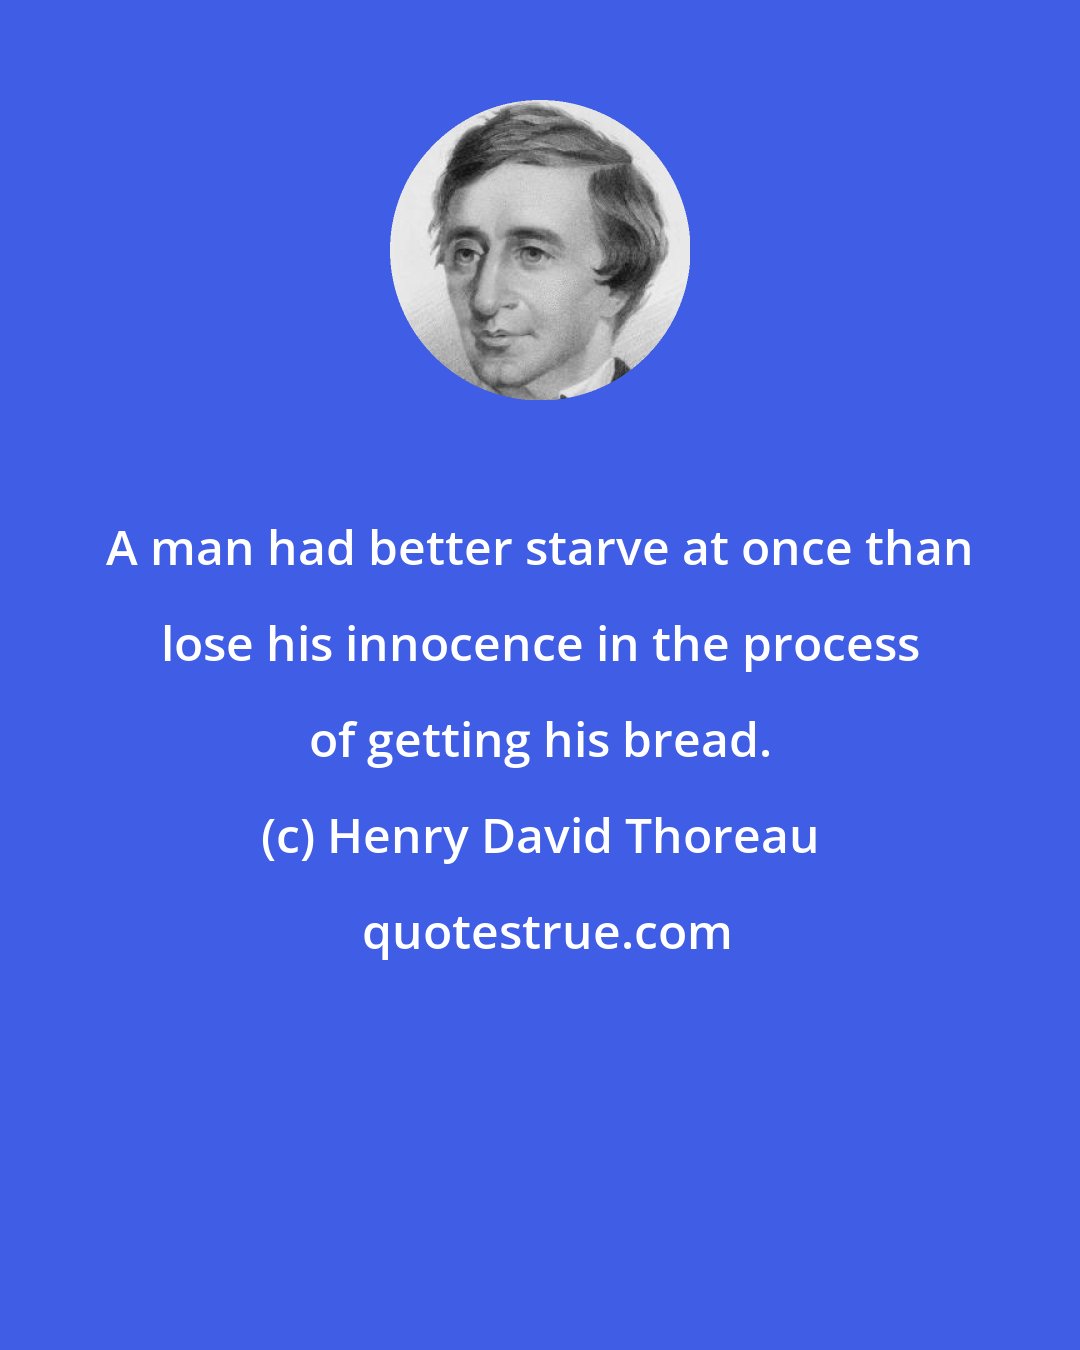 Henry David Thoreau: A man had better starve at once than lose his innocence in the process of getting his bread.